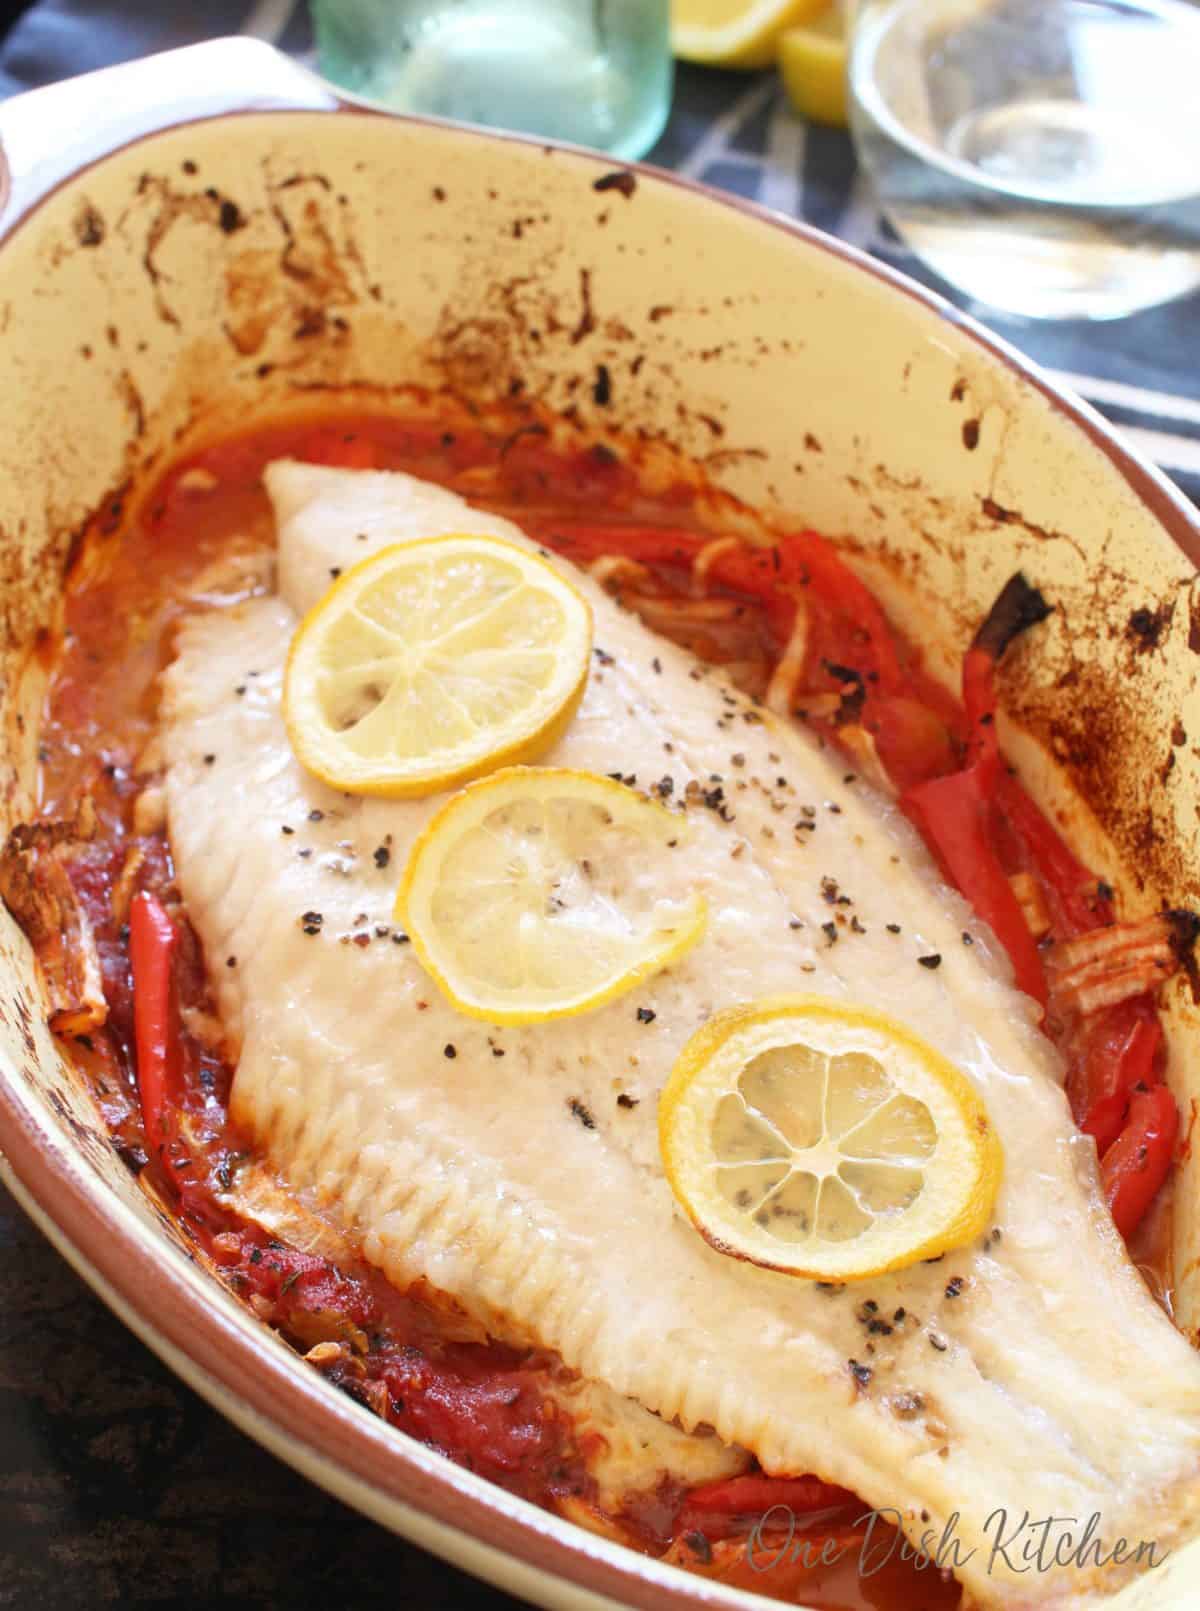 Closeup of catfish in a baking dish garnished with three lemon wheels and pepper flakes baked on a bed of red peppers and onions and there is a glass of white wine in the background.